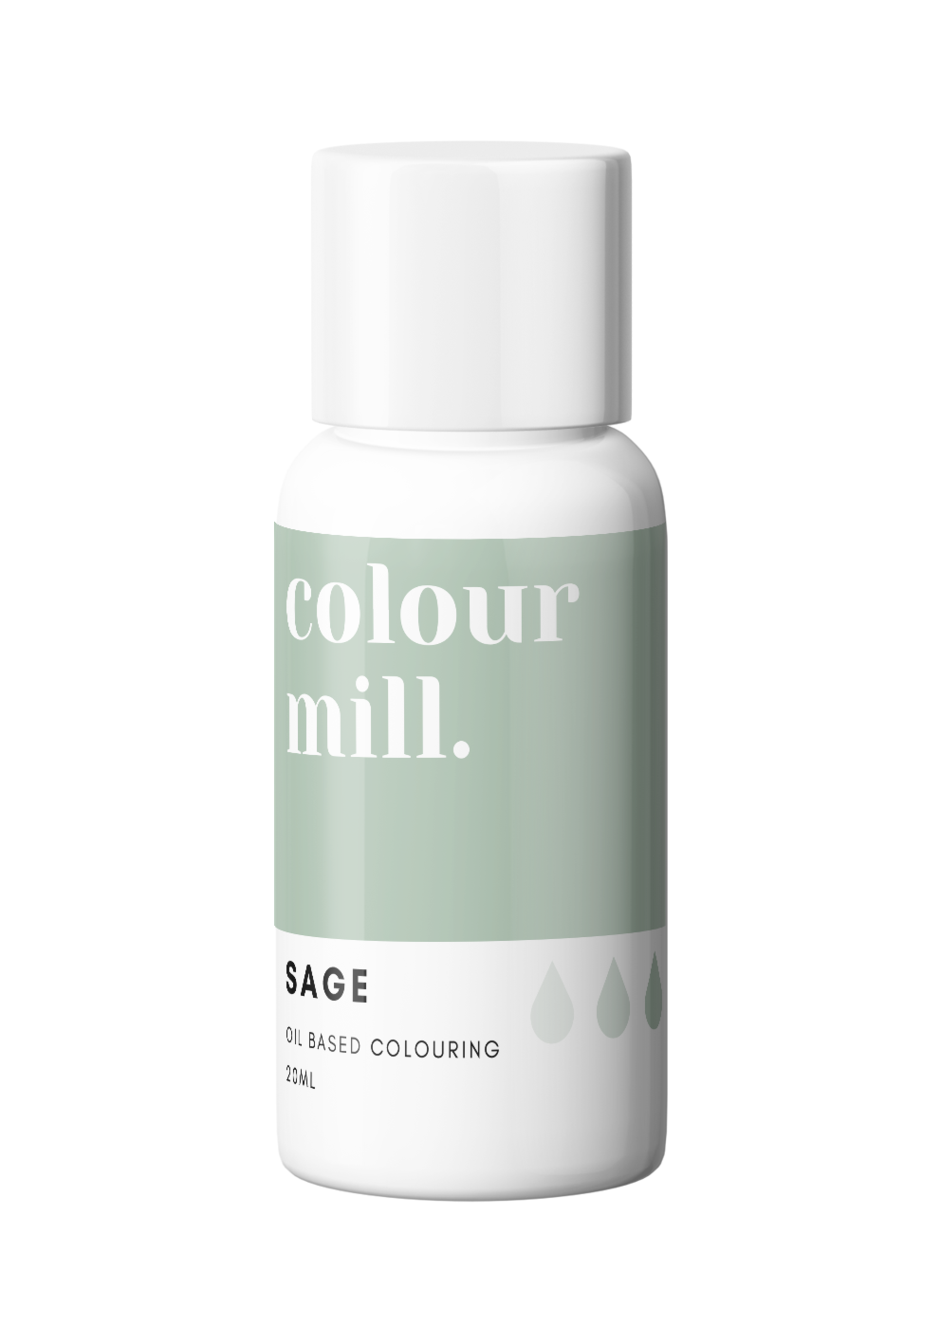 Sage, 20ml, Colour Mill Oil Based Colouring